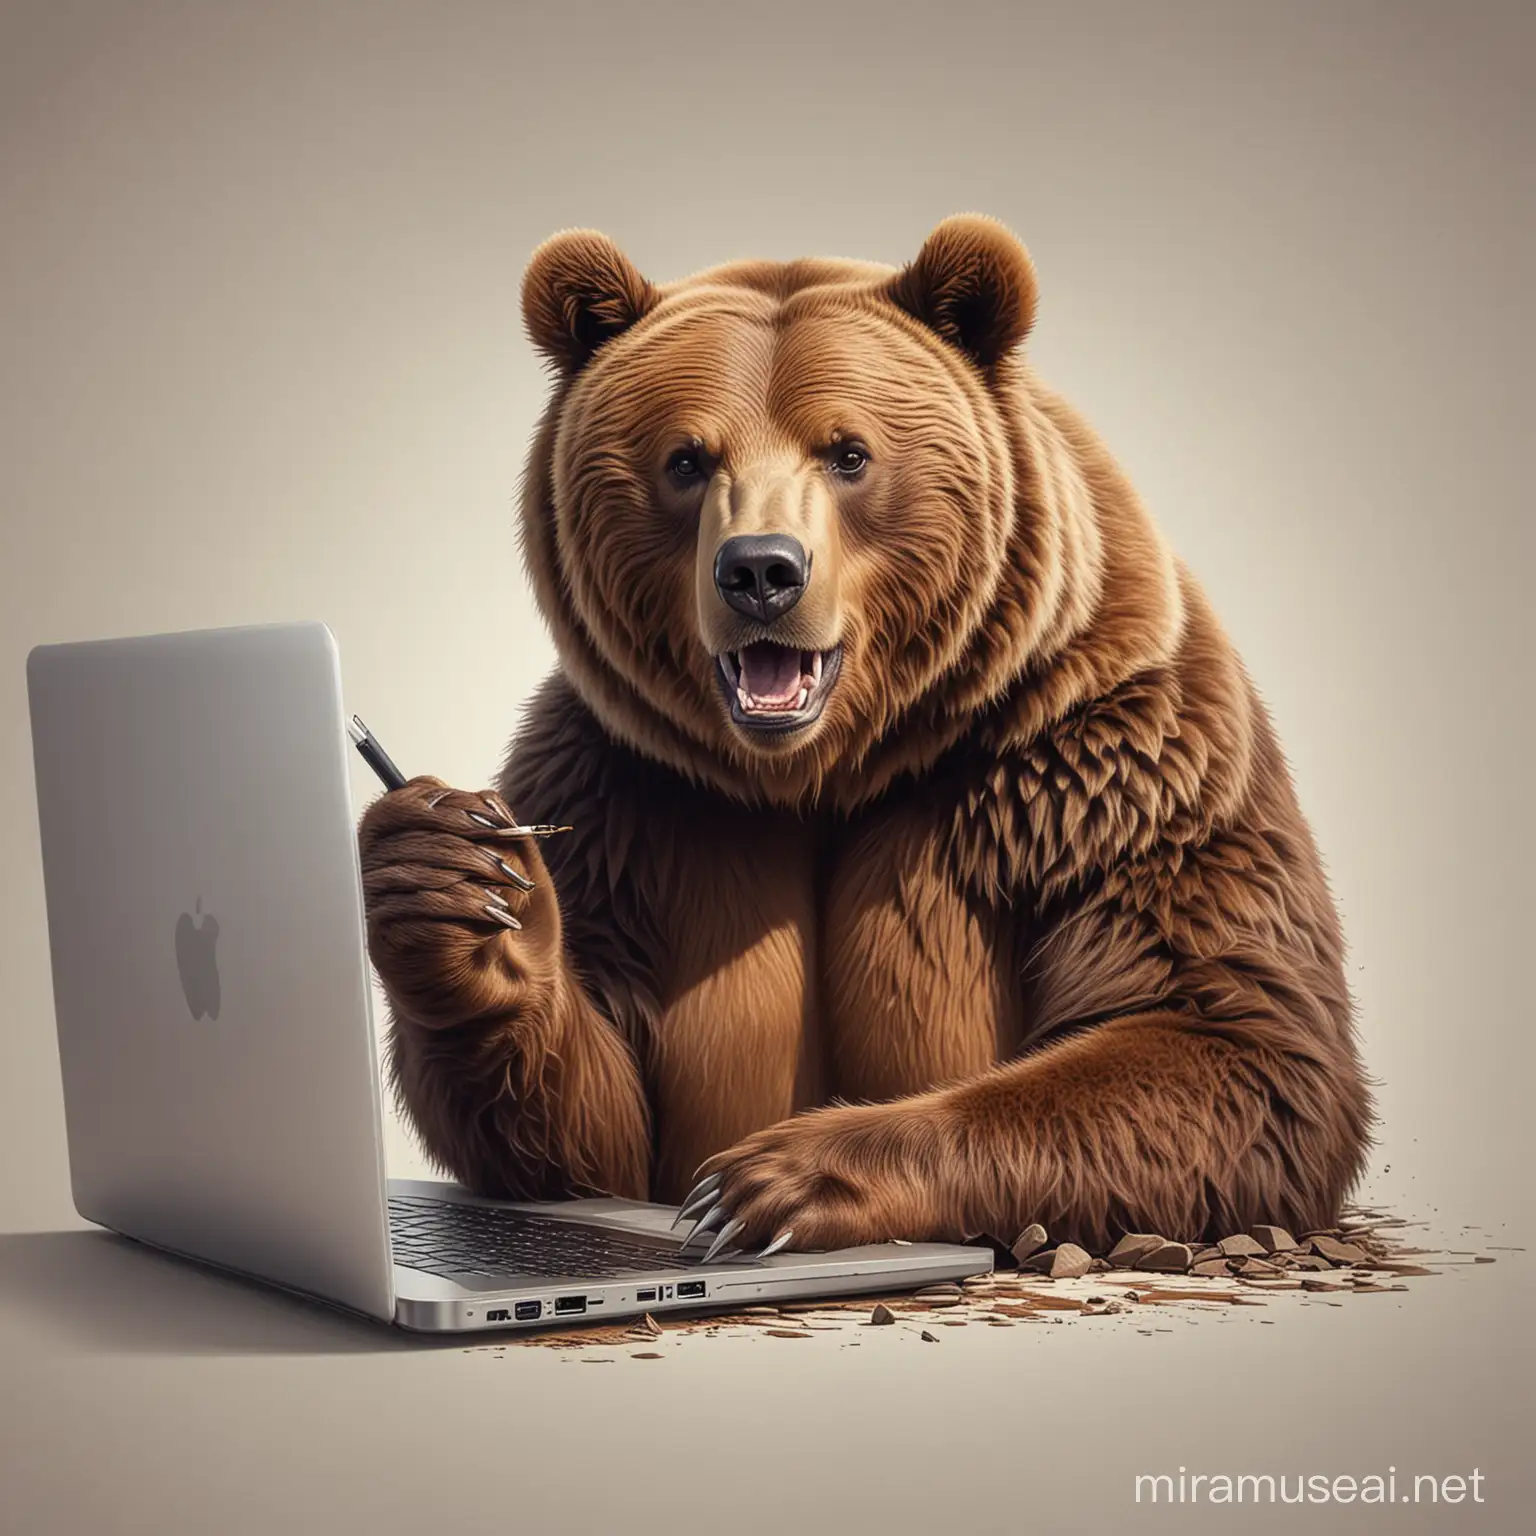 Brown Bear Working on Laptop Wildlife Meets Technology